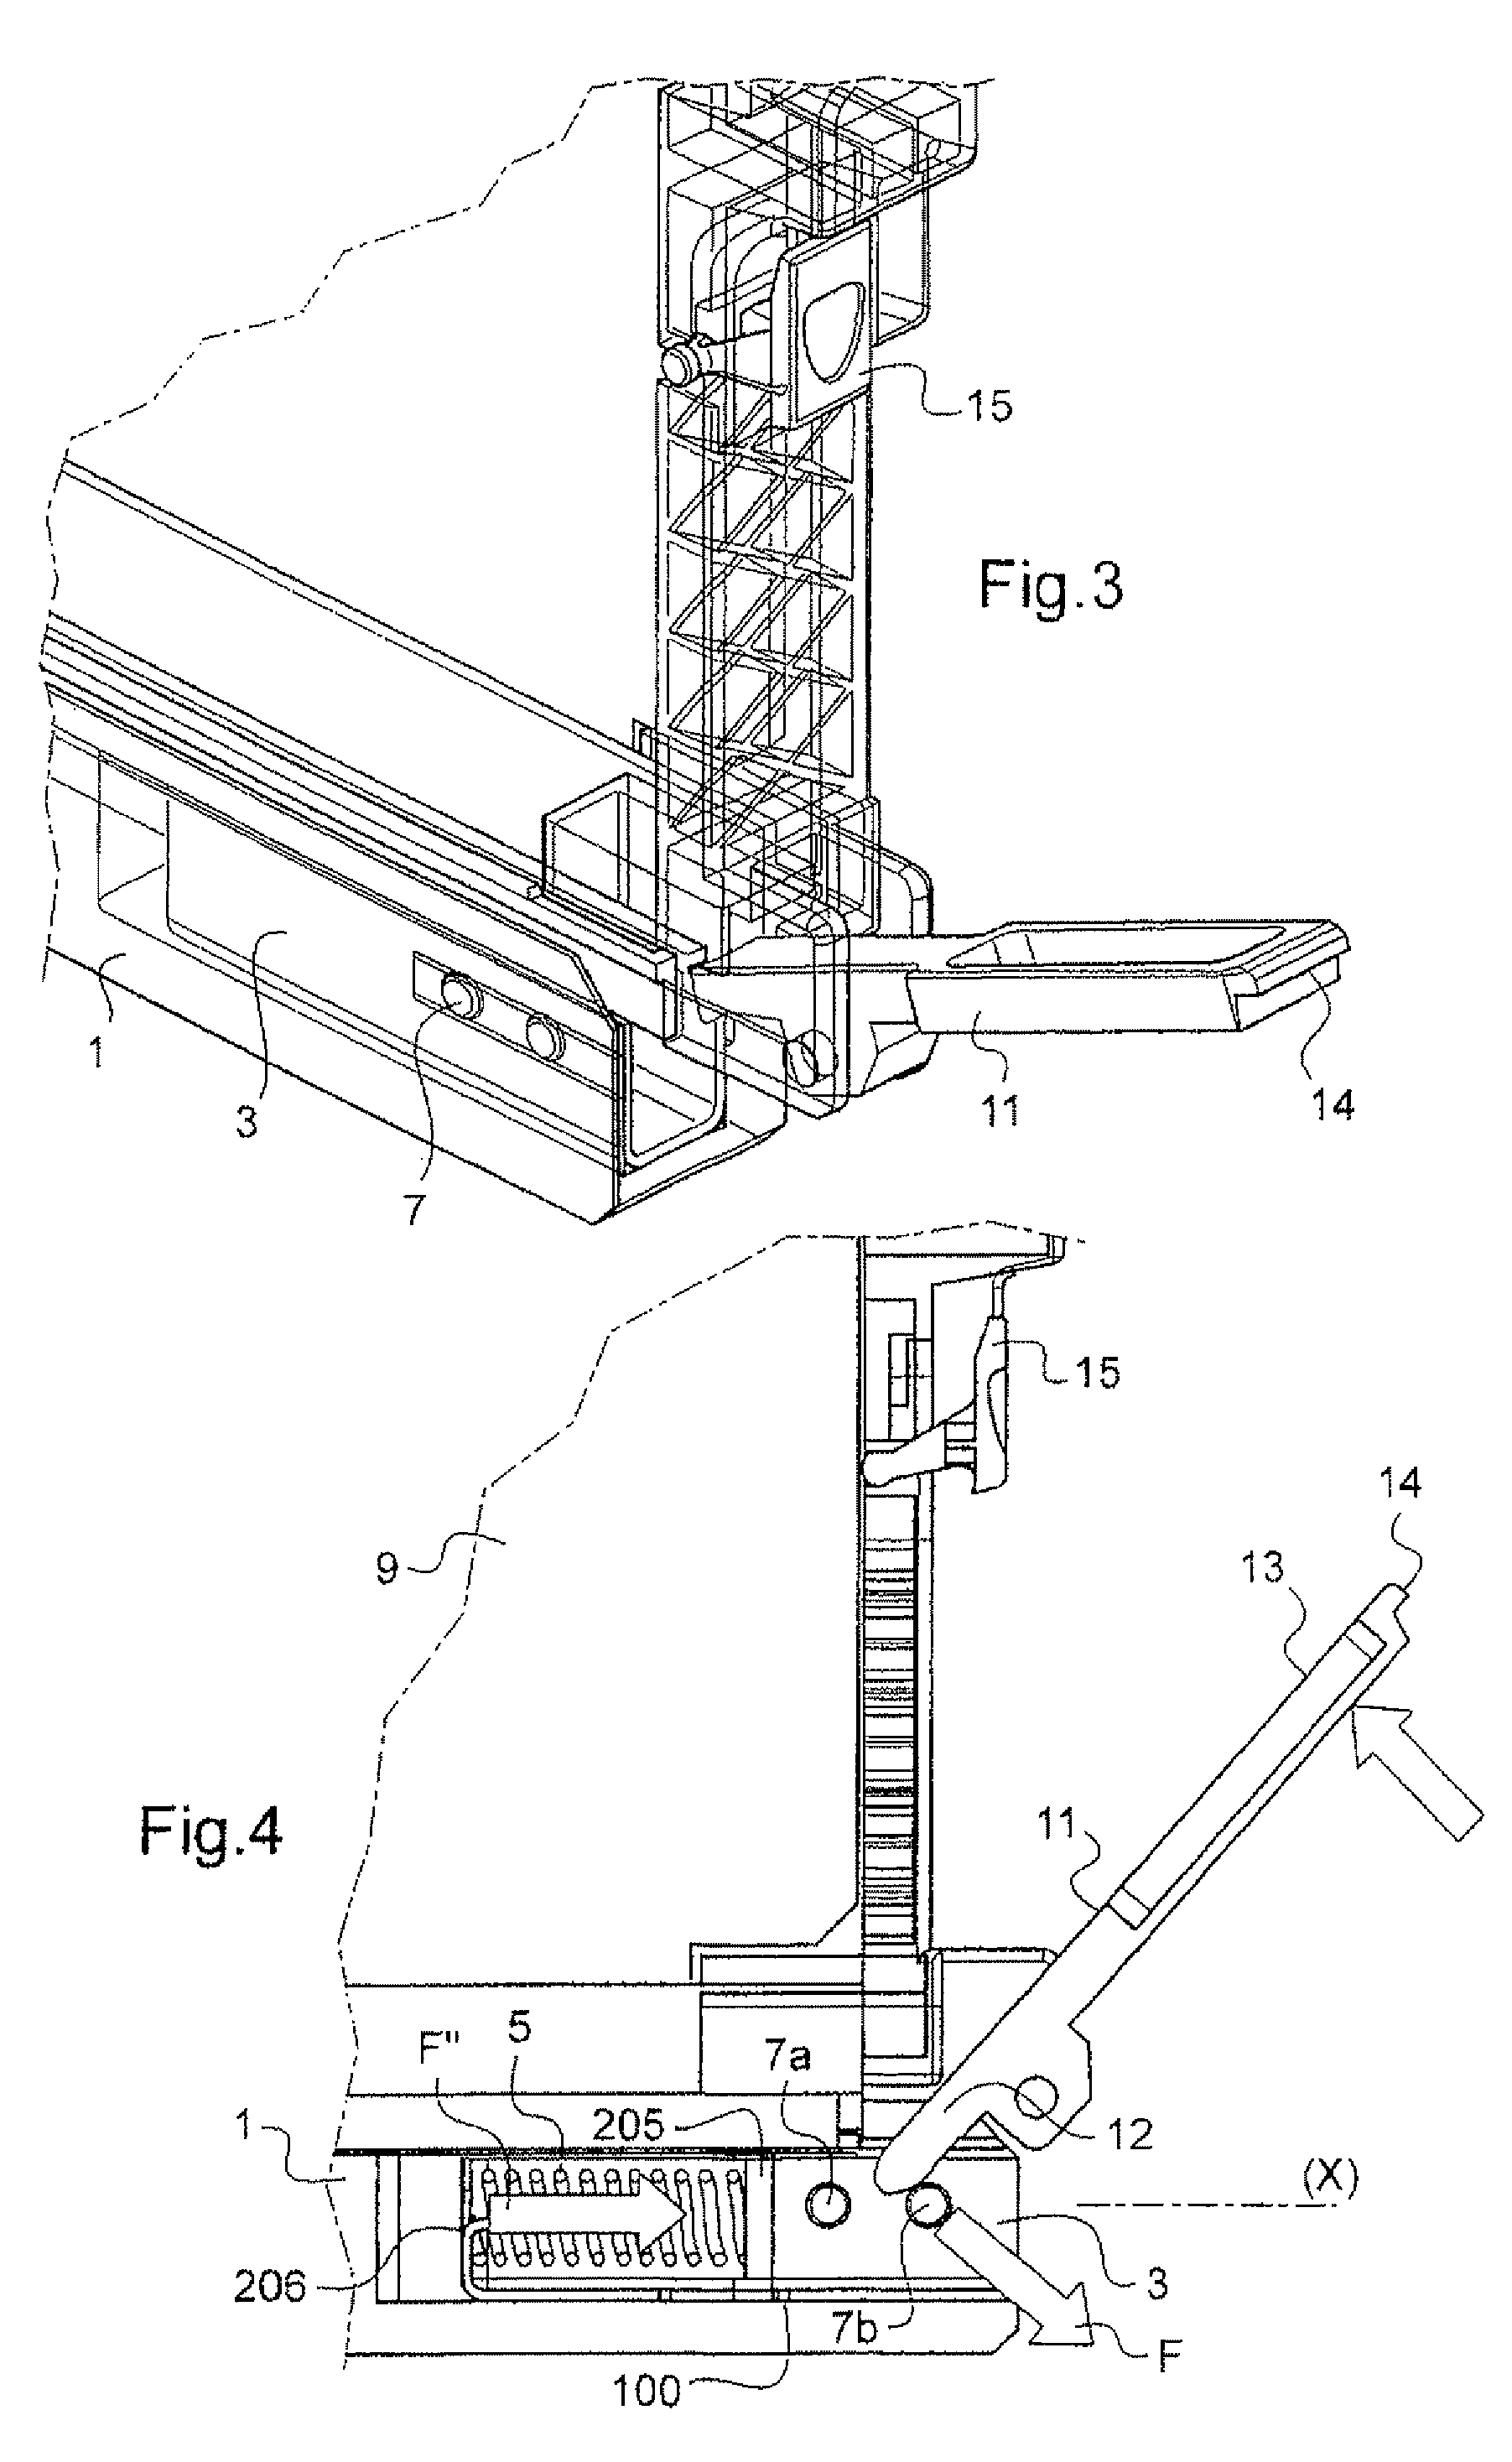 Locking assembly for locking an electronics card to a rack